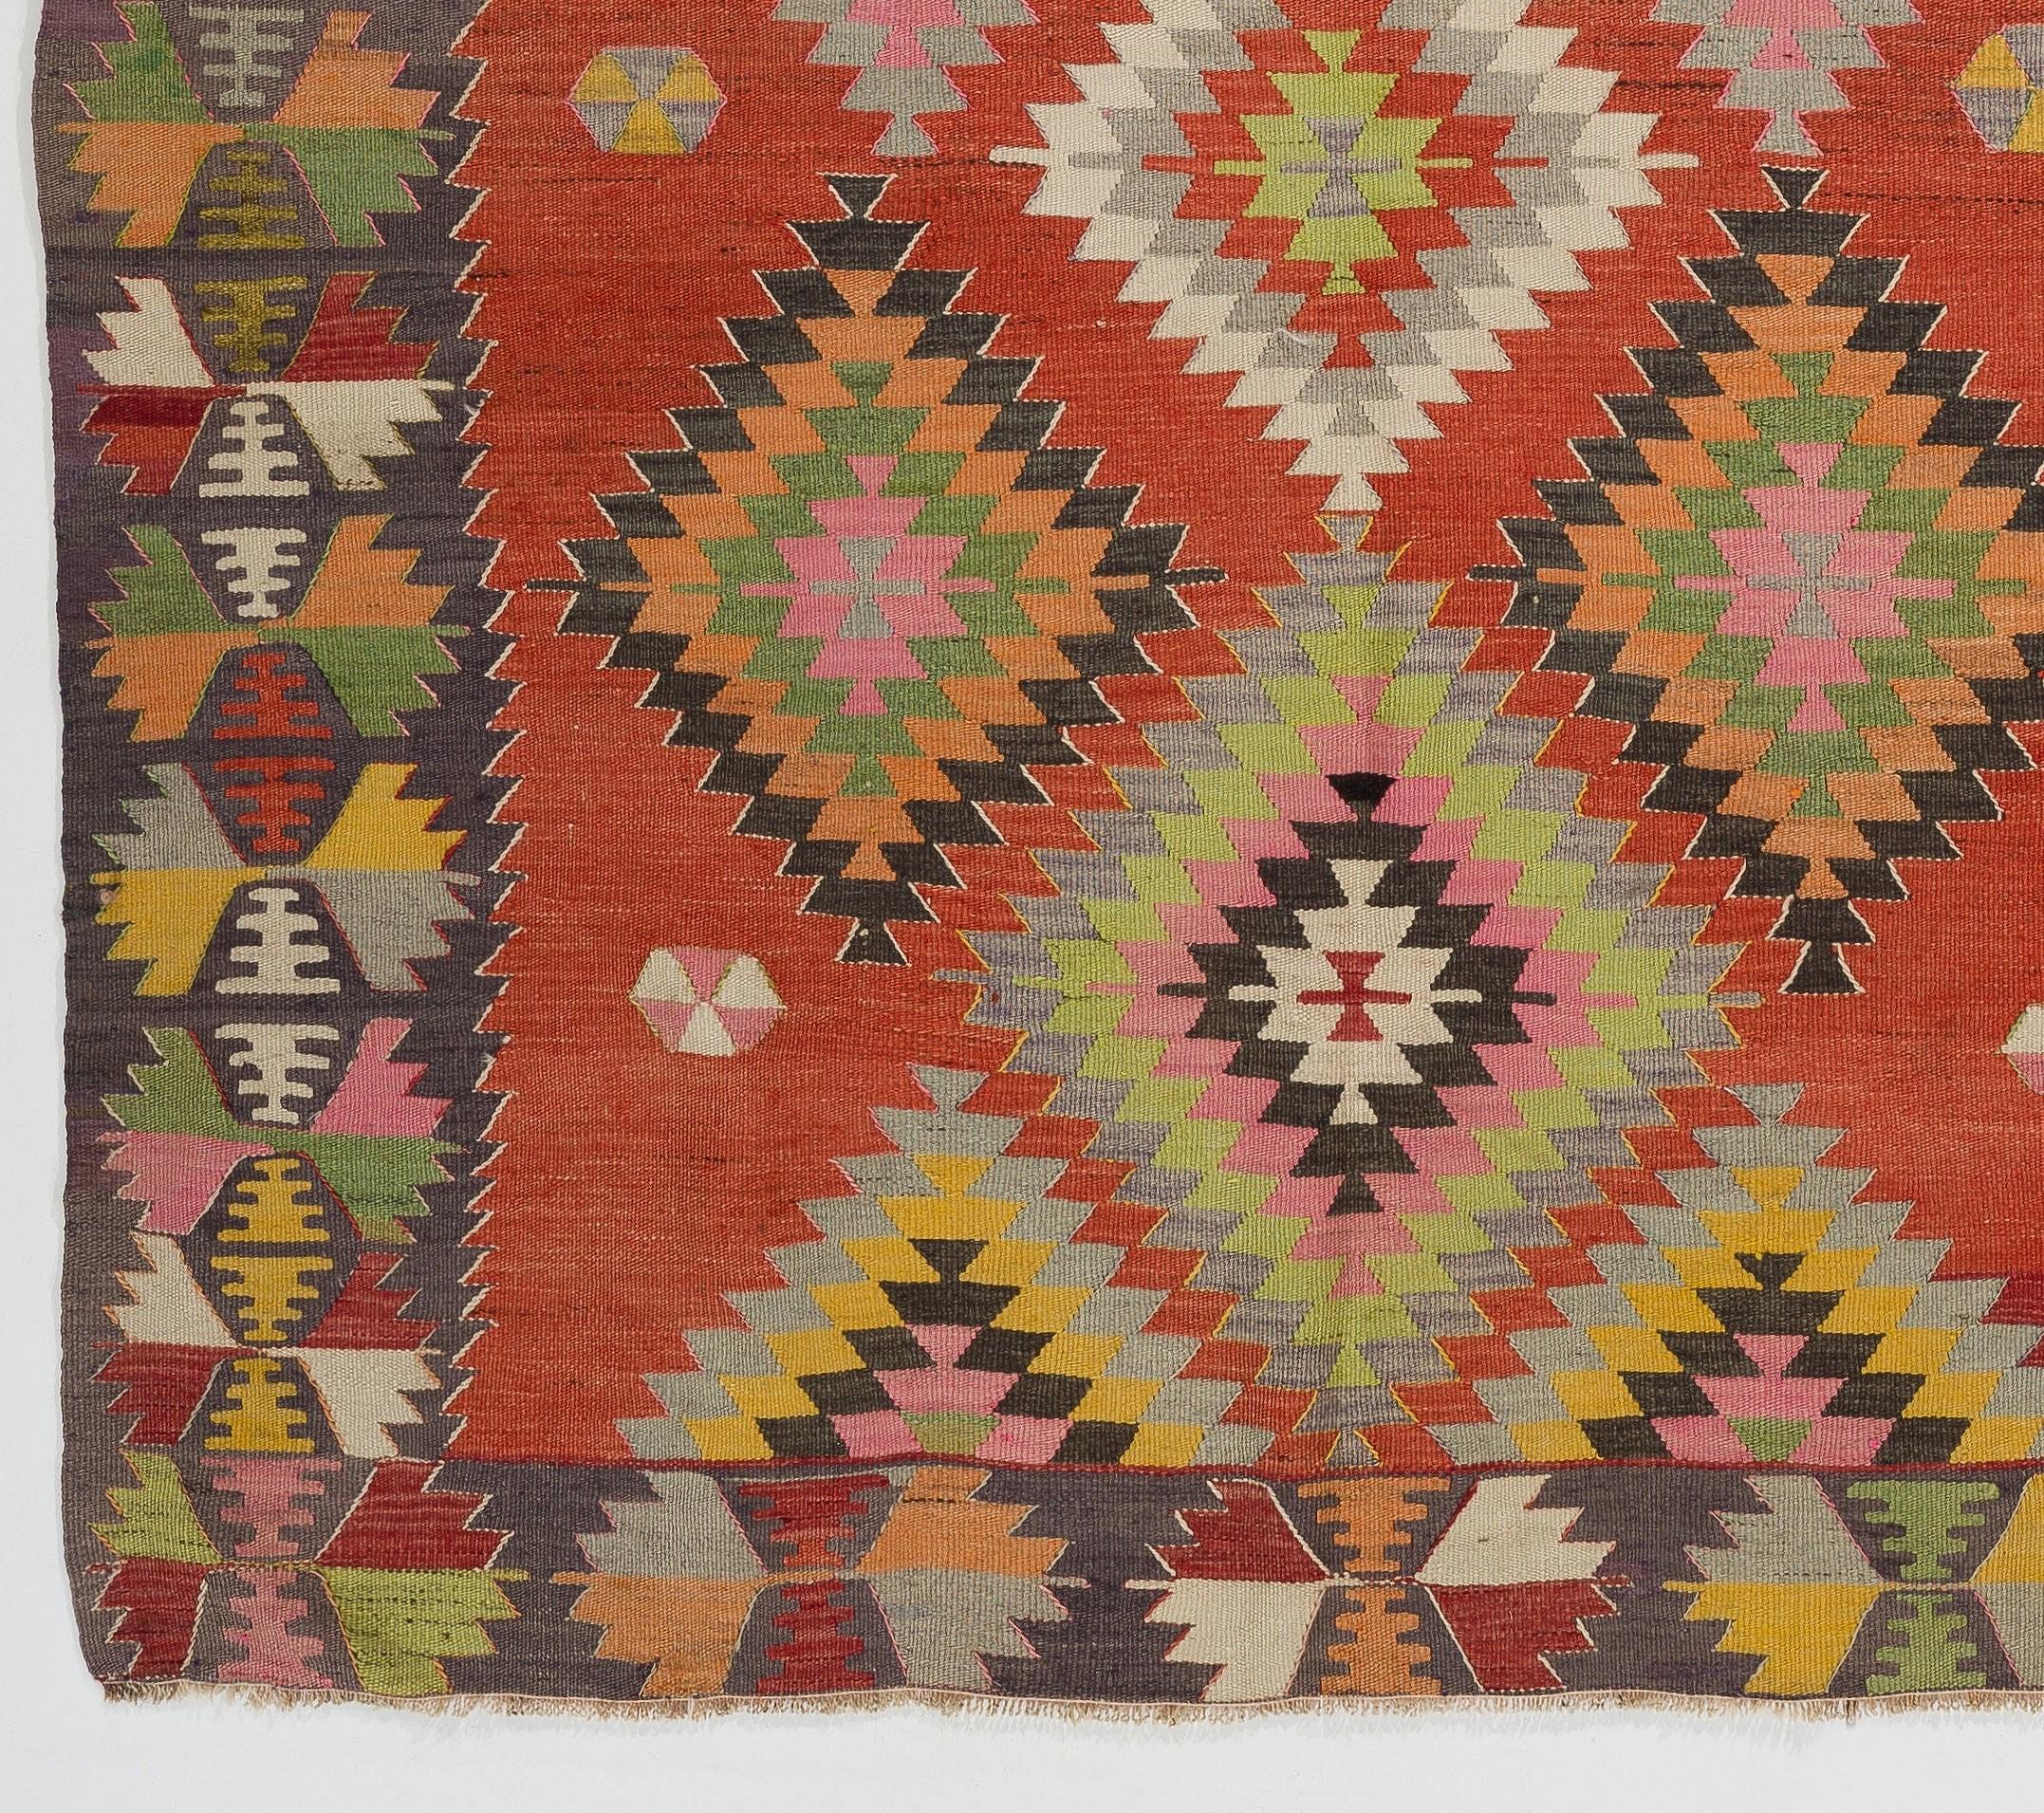 5.5x8 Ft Handwoven Vintage Anatolian Kilim, Geometric Wool Rug for Home Decor In Good Condition For Sale In Philadelphia, PA